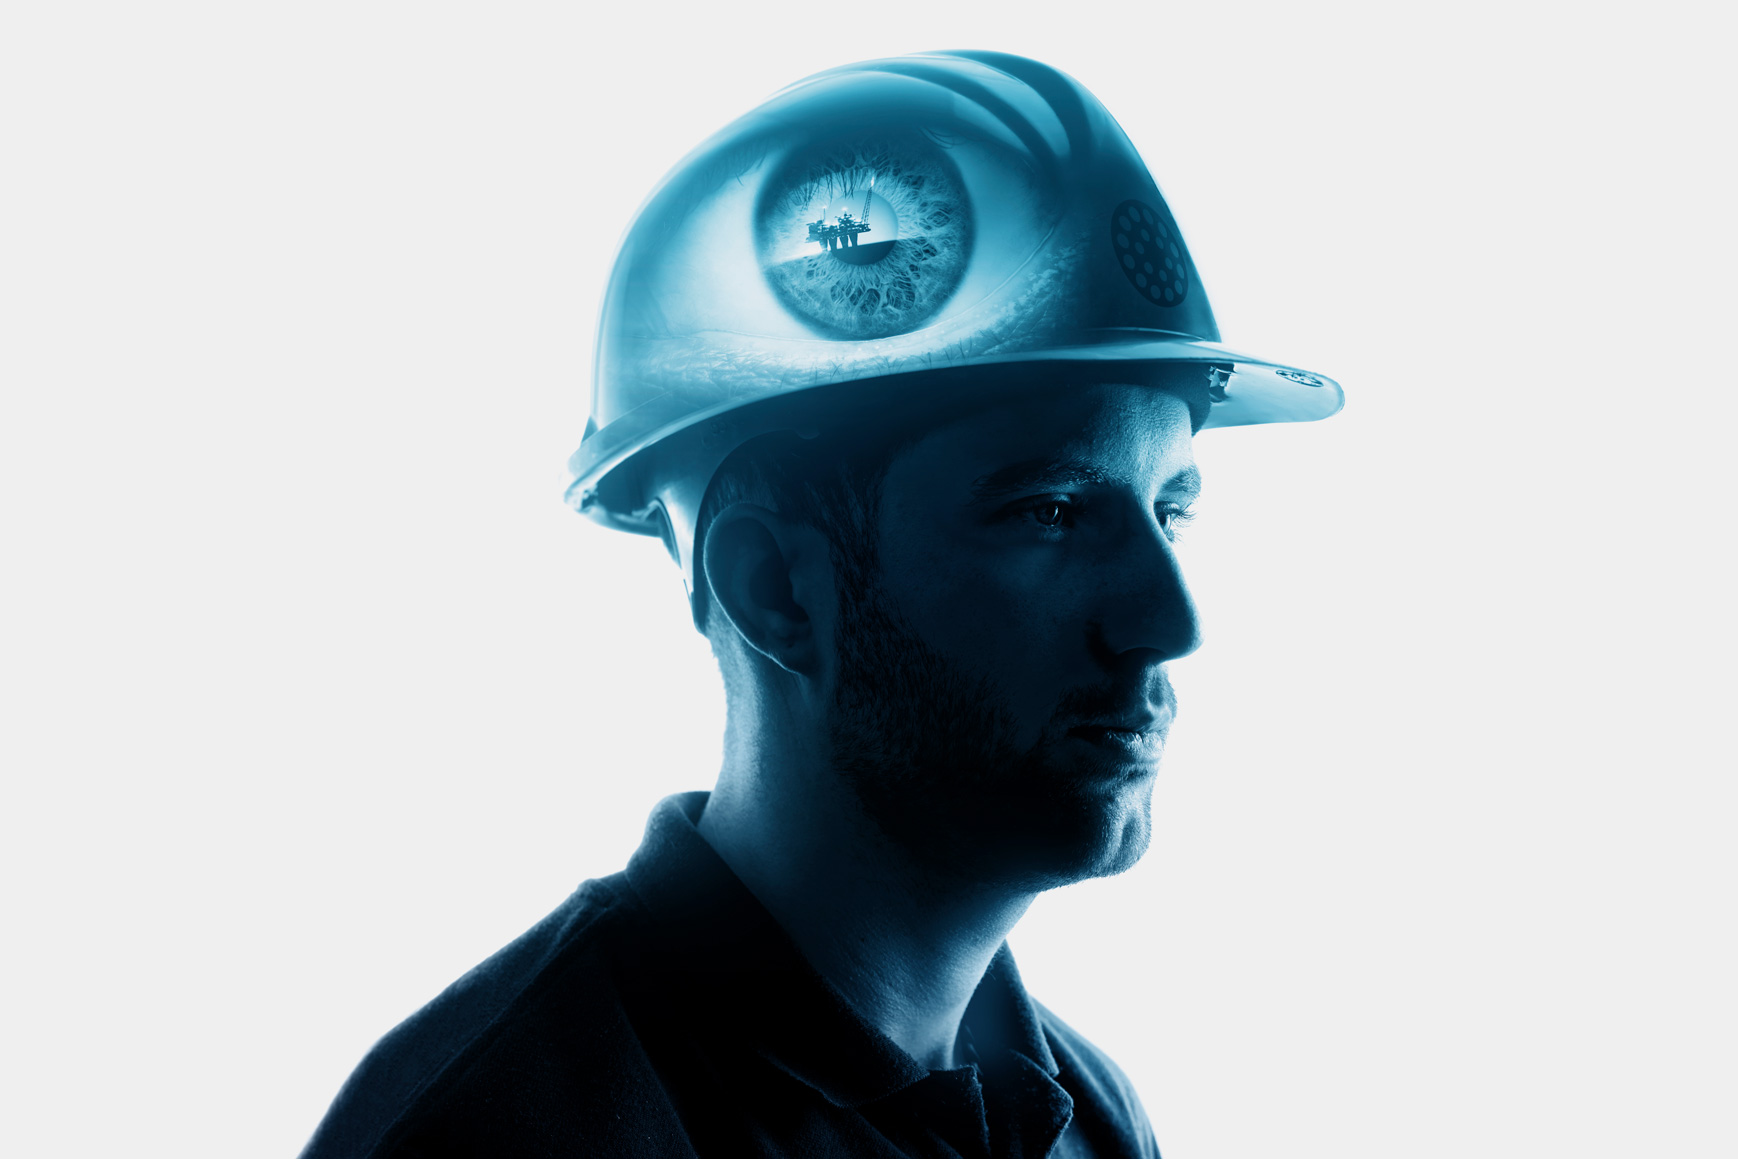 Hero brand image showing man with hard hat with an eye superimposed into the side of the hat.